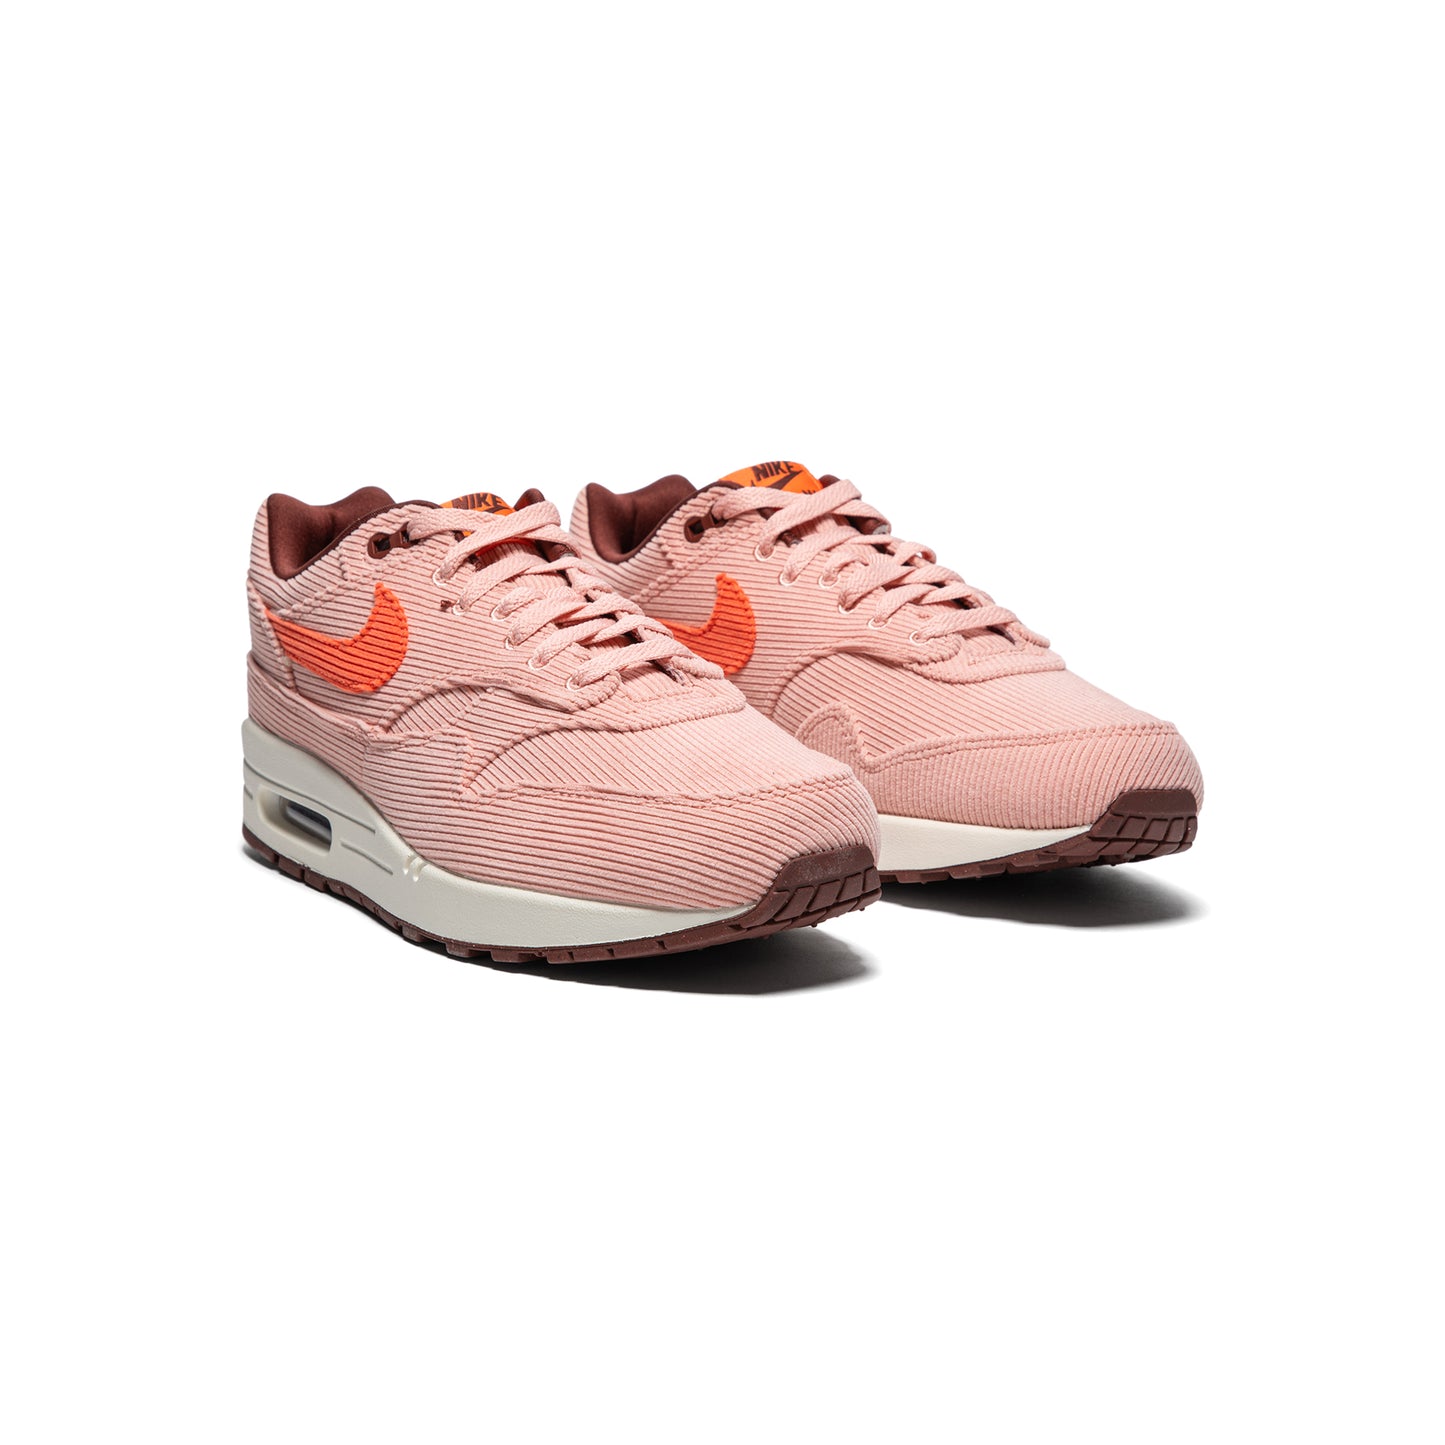 Nike Air Max 1 PRM (Coral Stardust/Bright Coral/Oxen Brown)